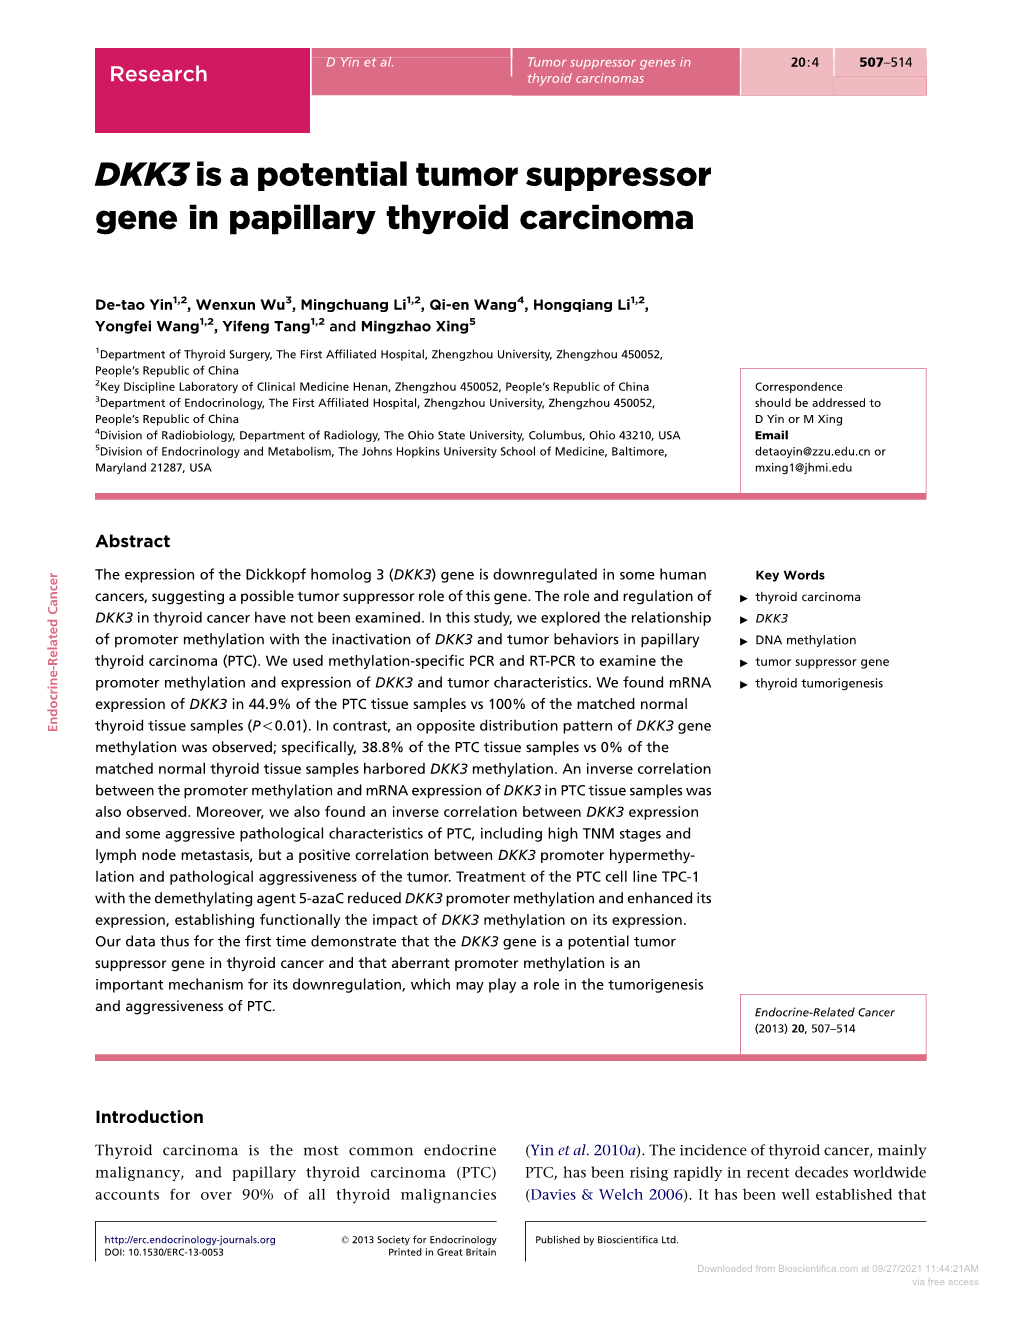 DKK3 Is a Potential Tumor Suppressor Gene in Papillary Thyroid Carcinoma